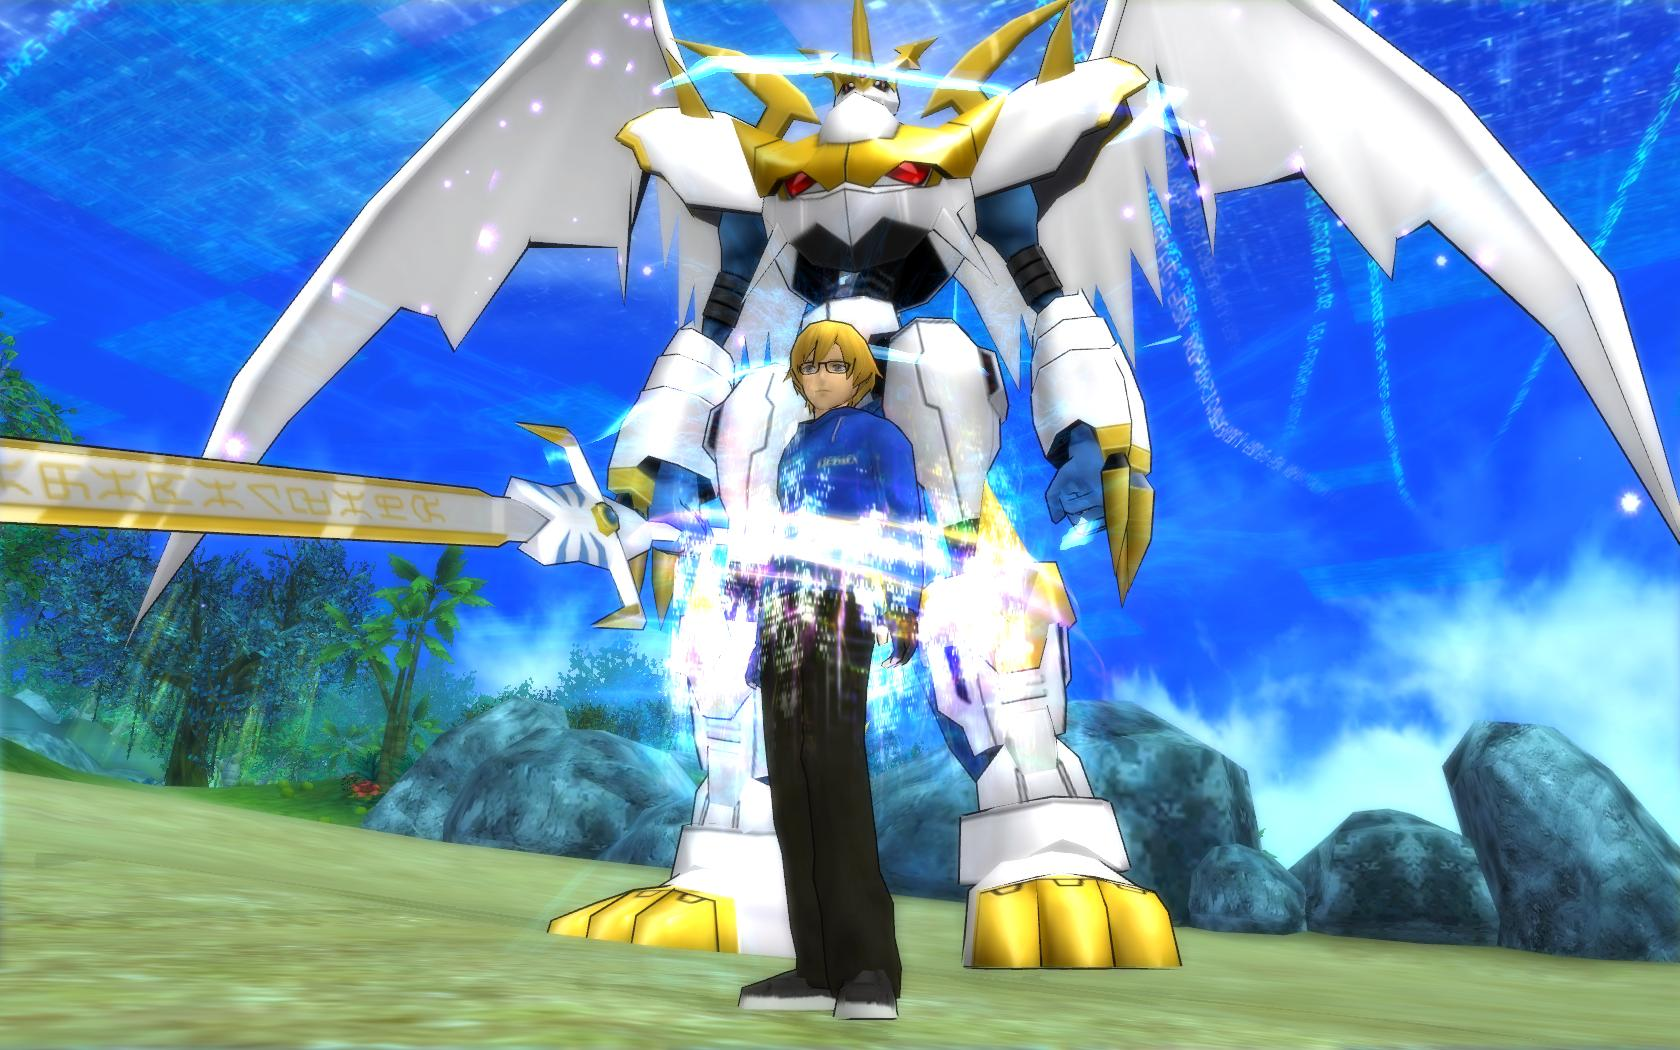 Digimon Masters Online Introduces Imperial Dramon Paladin